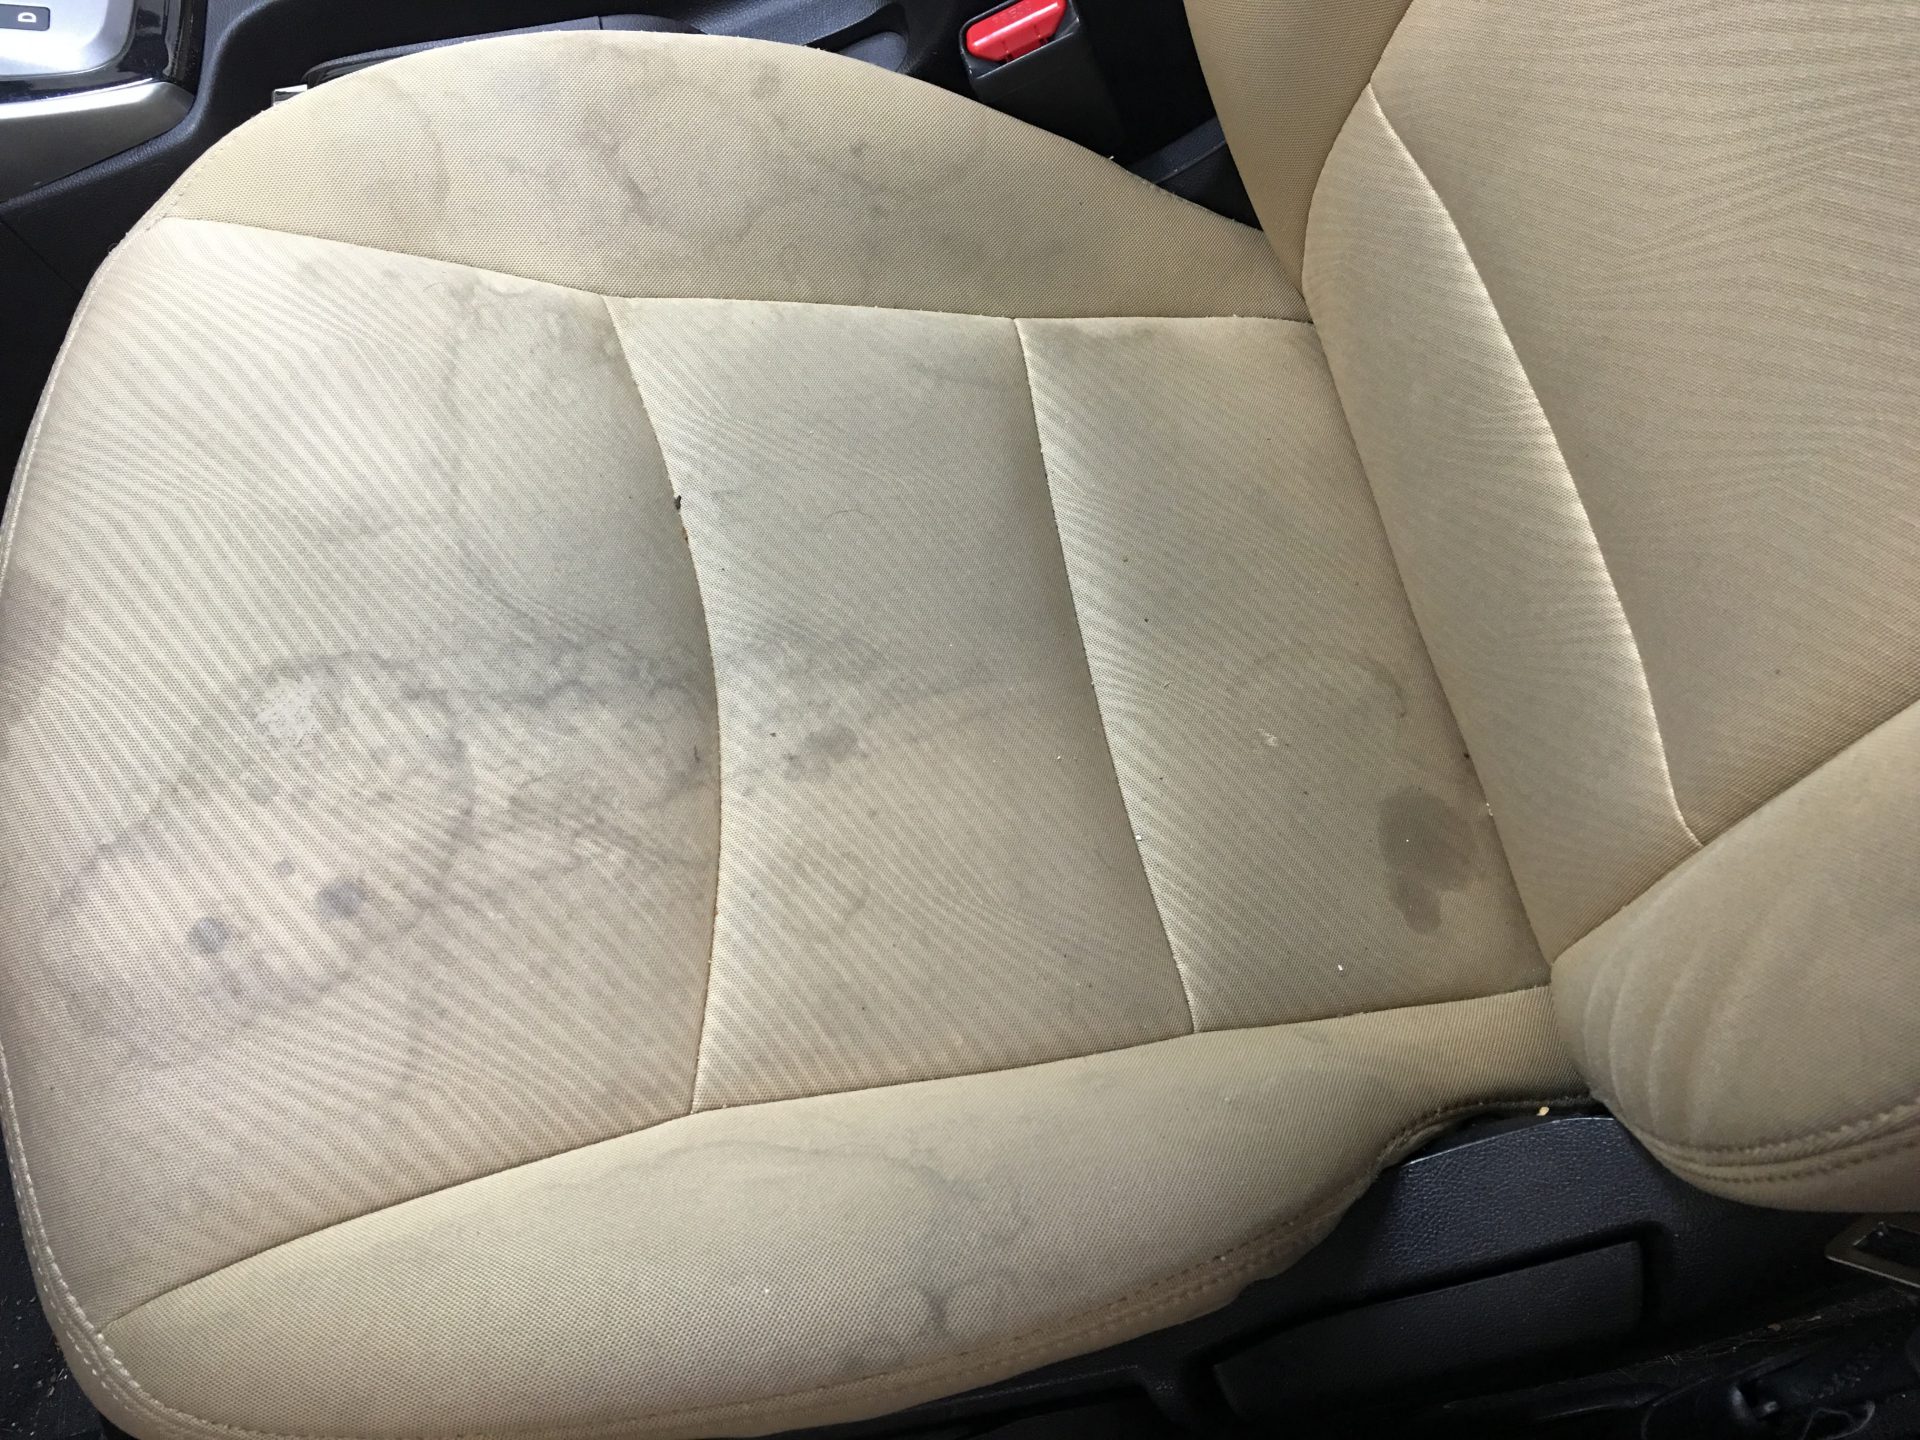 How to remove stains from a car seat